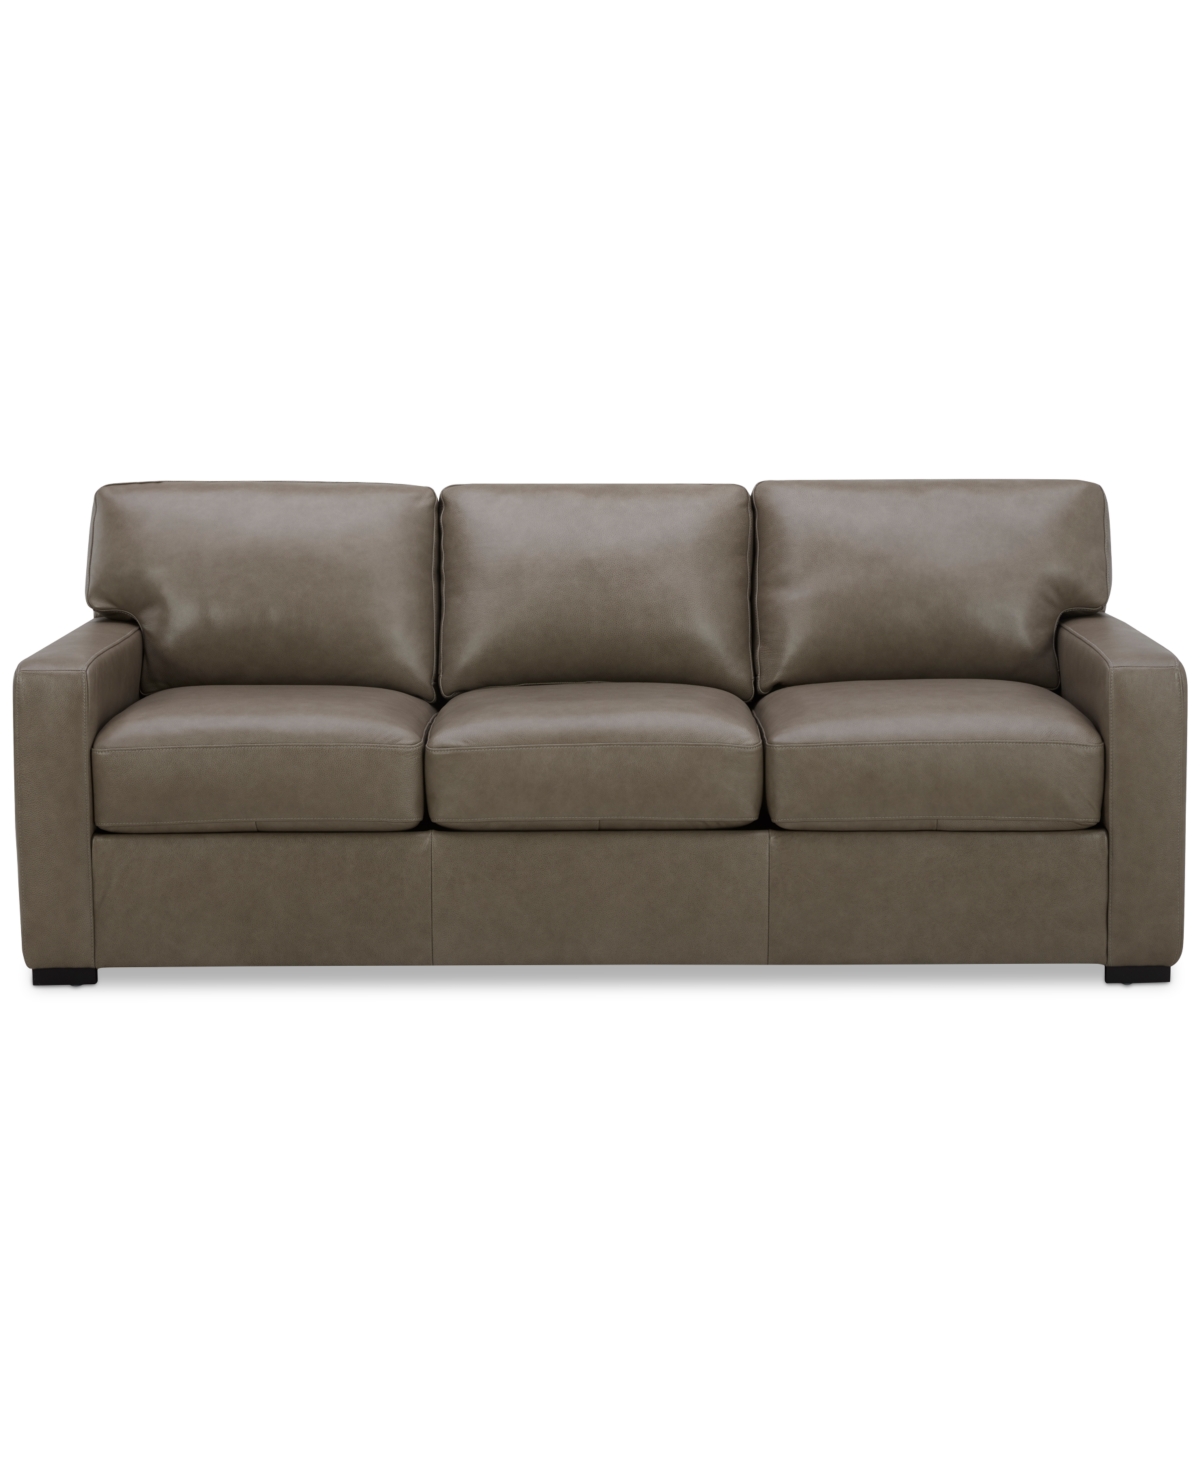 Macy's Radley 86" Leather Sofa, Created For  In Taupe